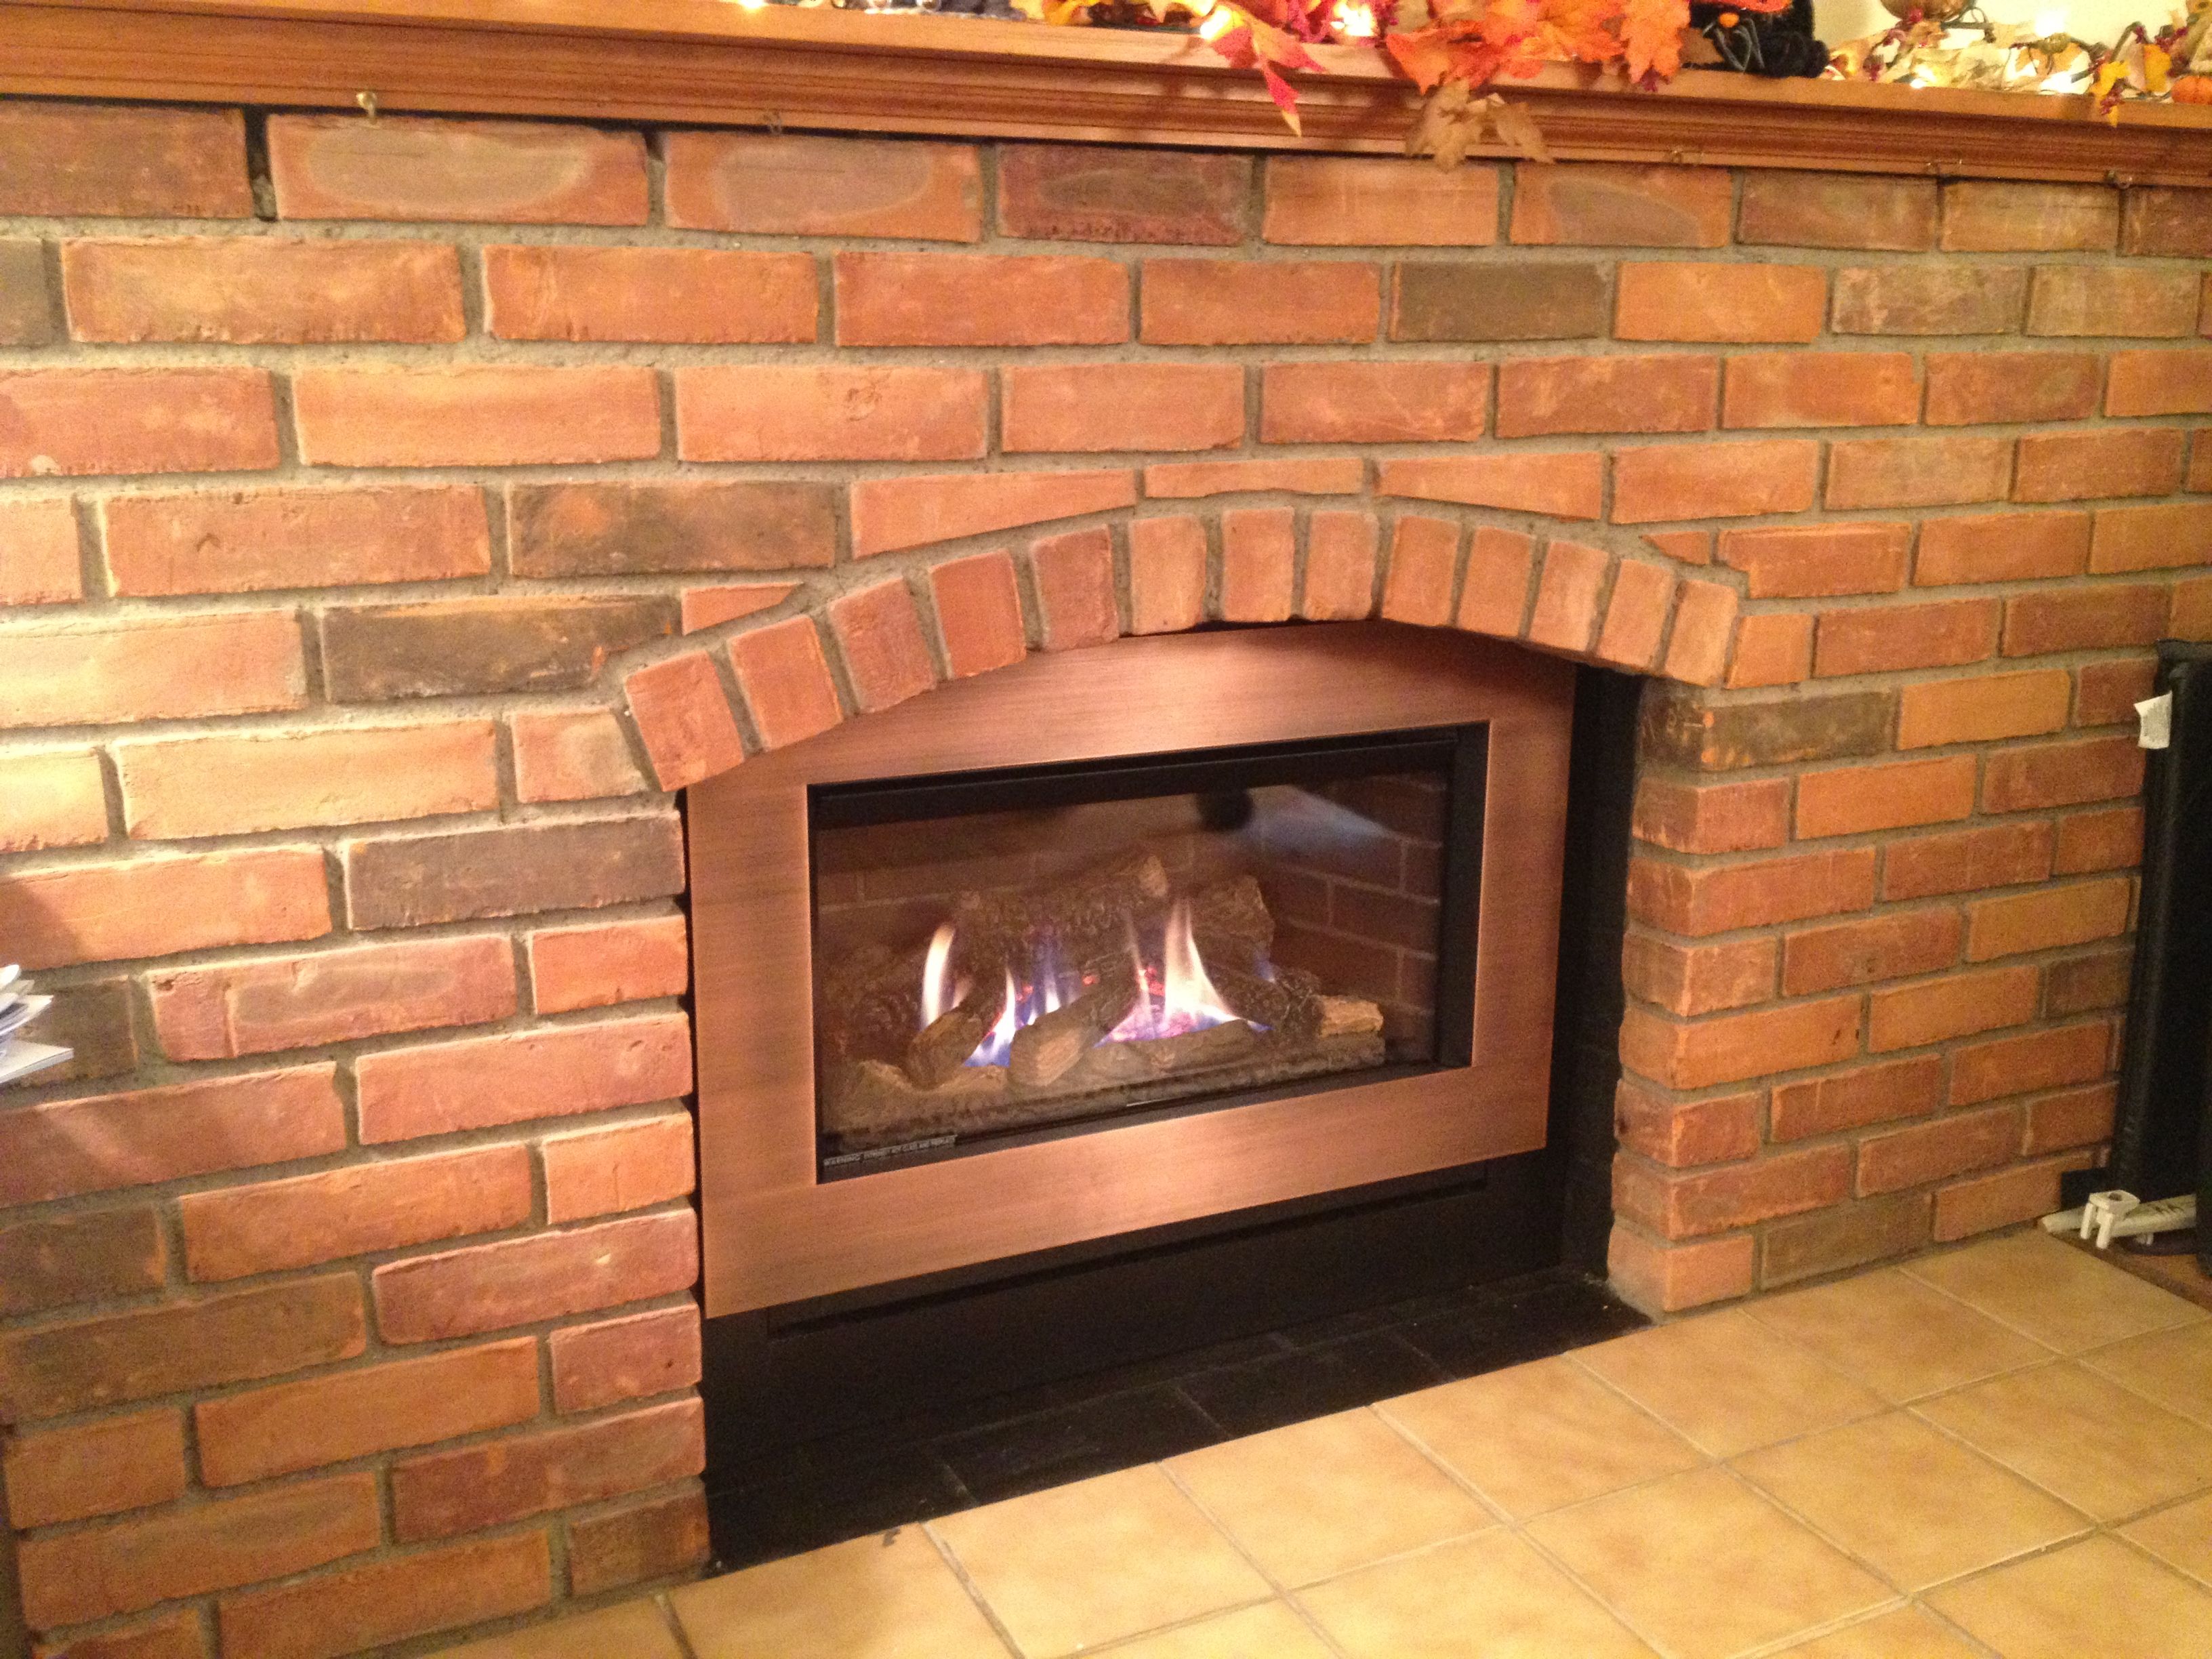 How to Install A Gas Fireplace Beautiful Pin On Valor Radiant Gas Fireplaces Midwest Dealer